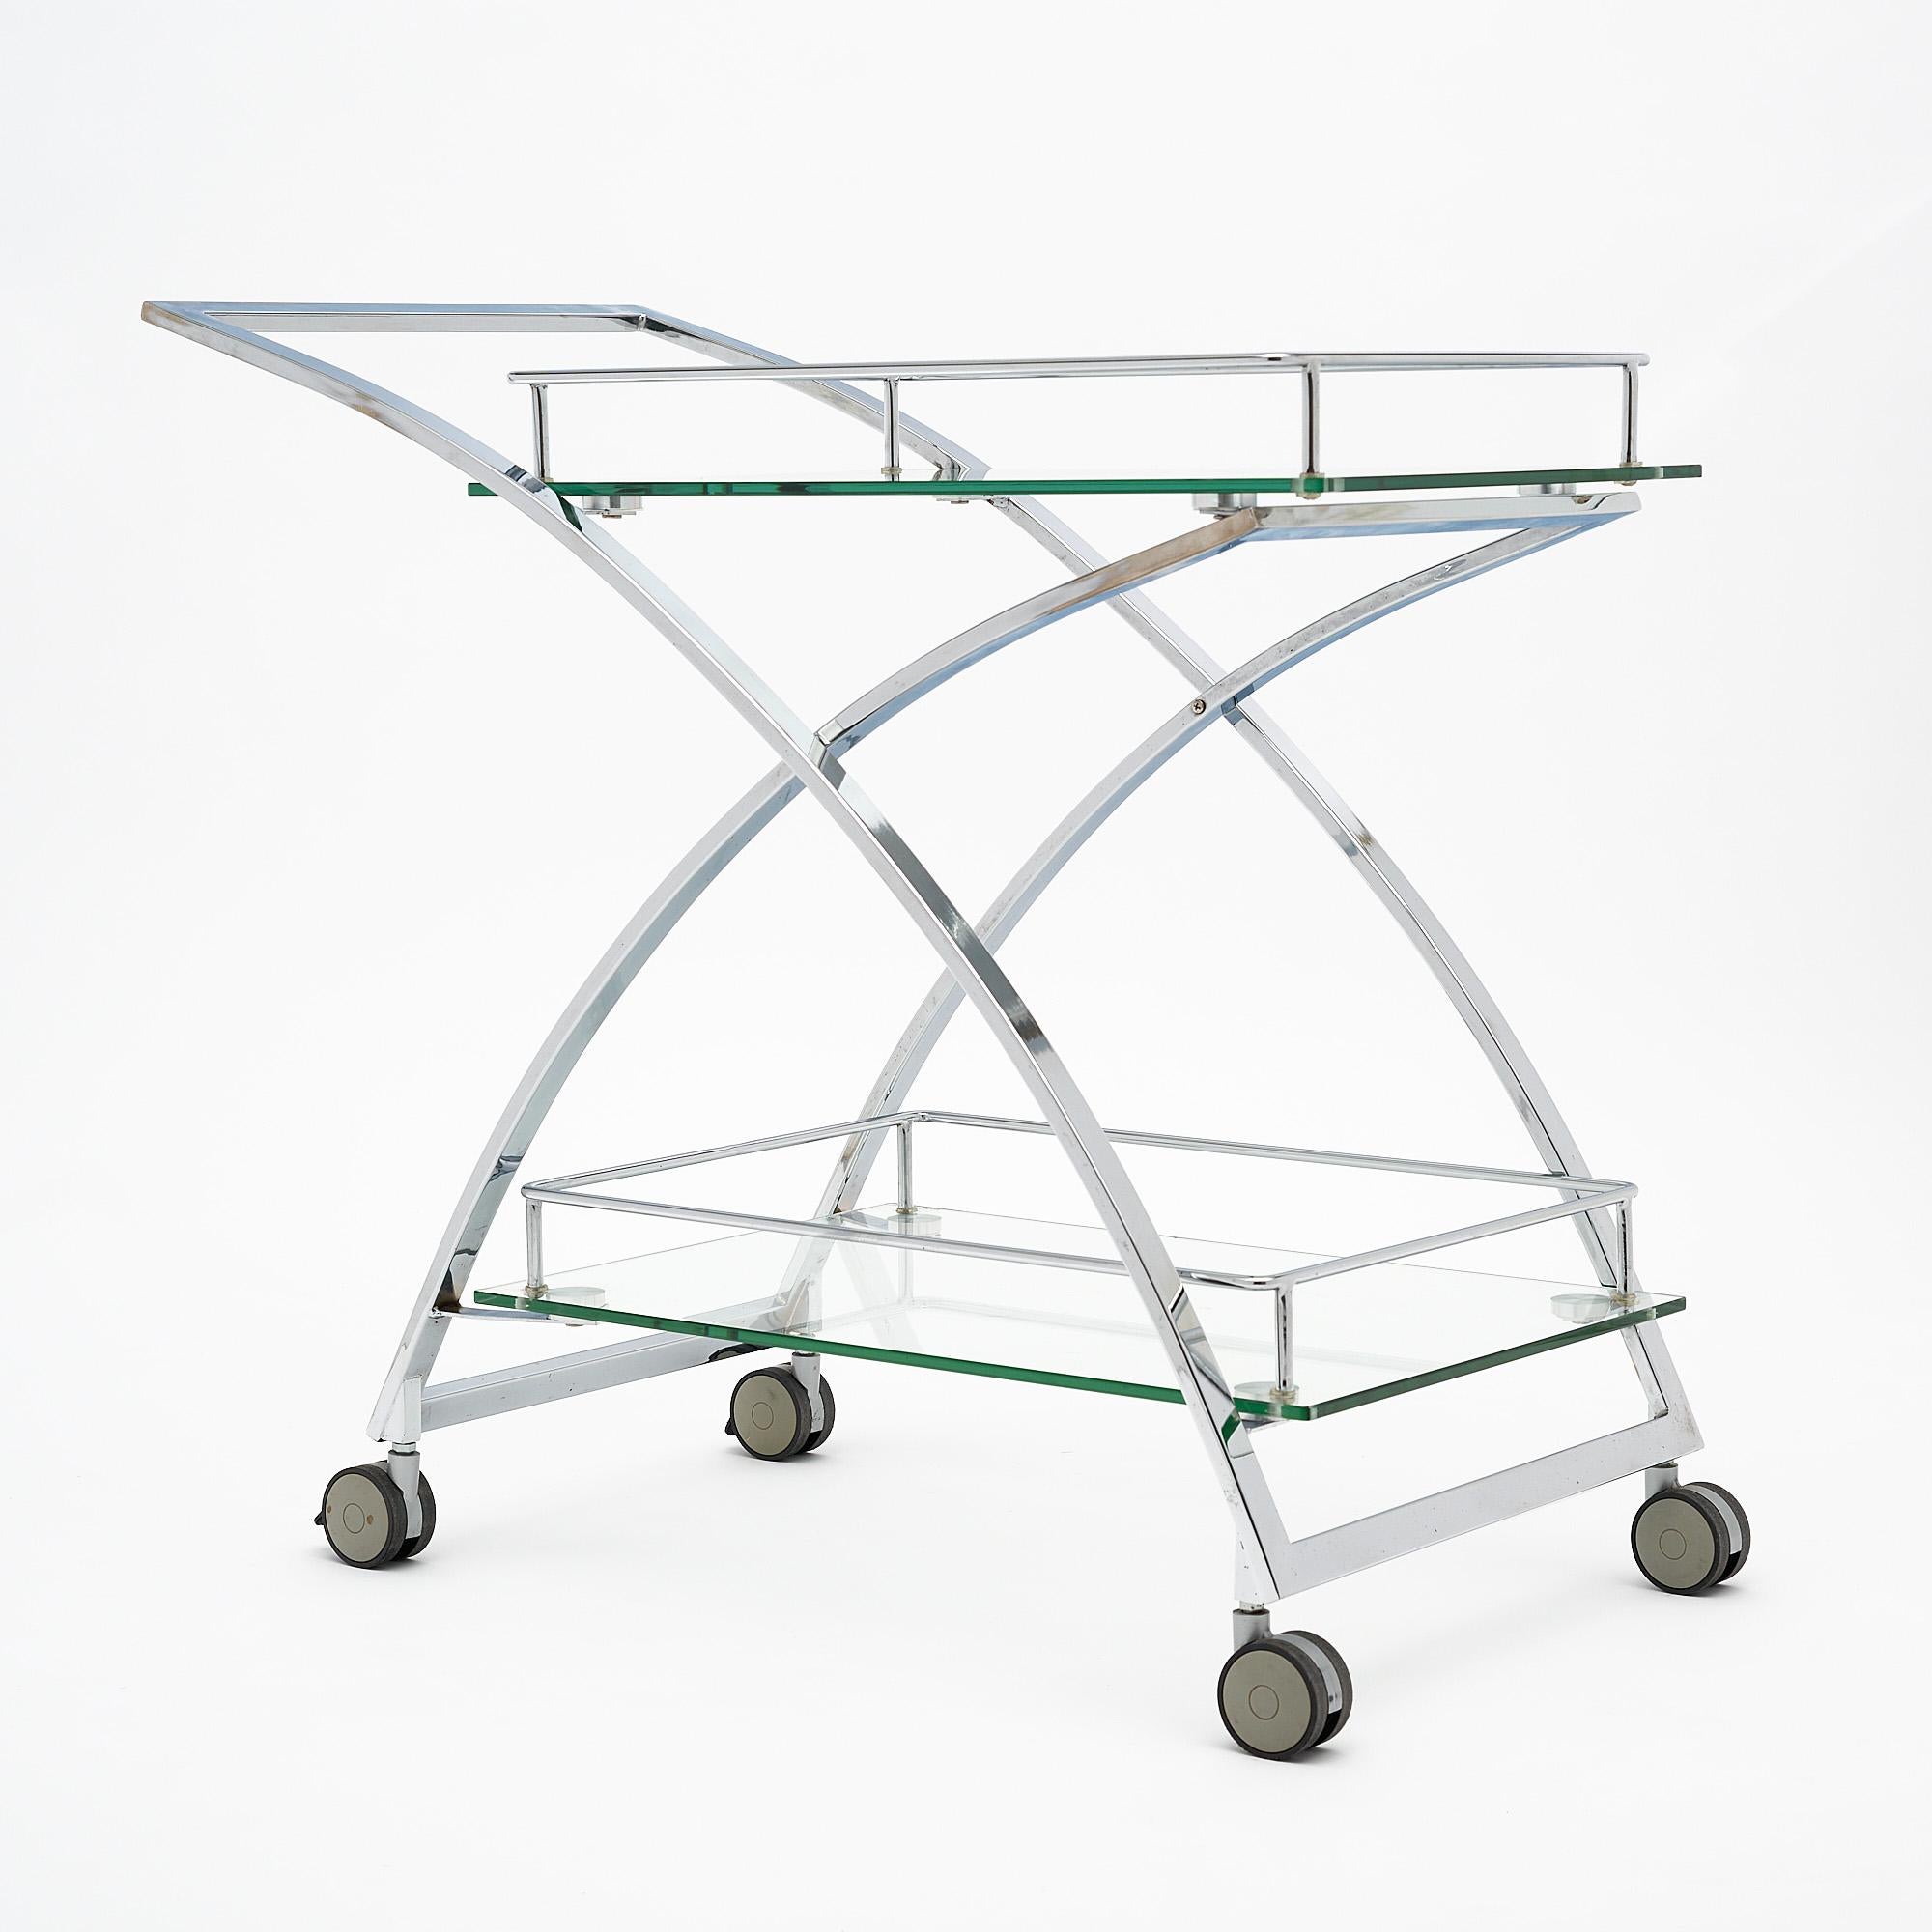 Bar cart, French, of chromed steel. The modernist bar cart features two thick glass shelves and is supported on casters.